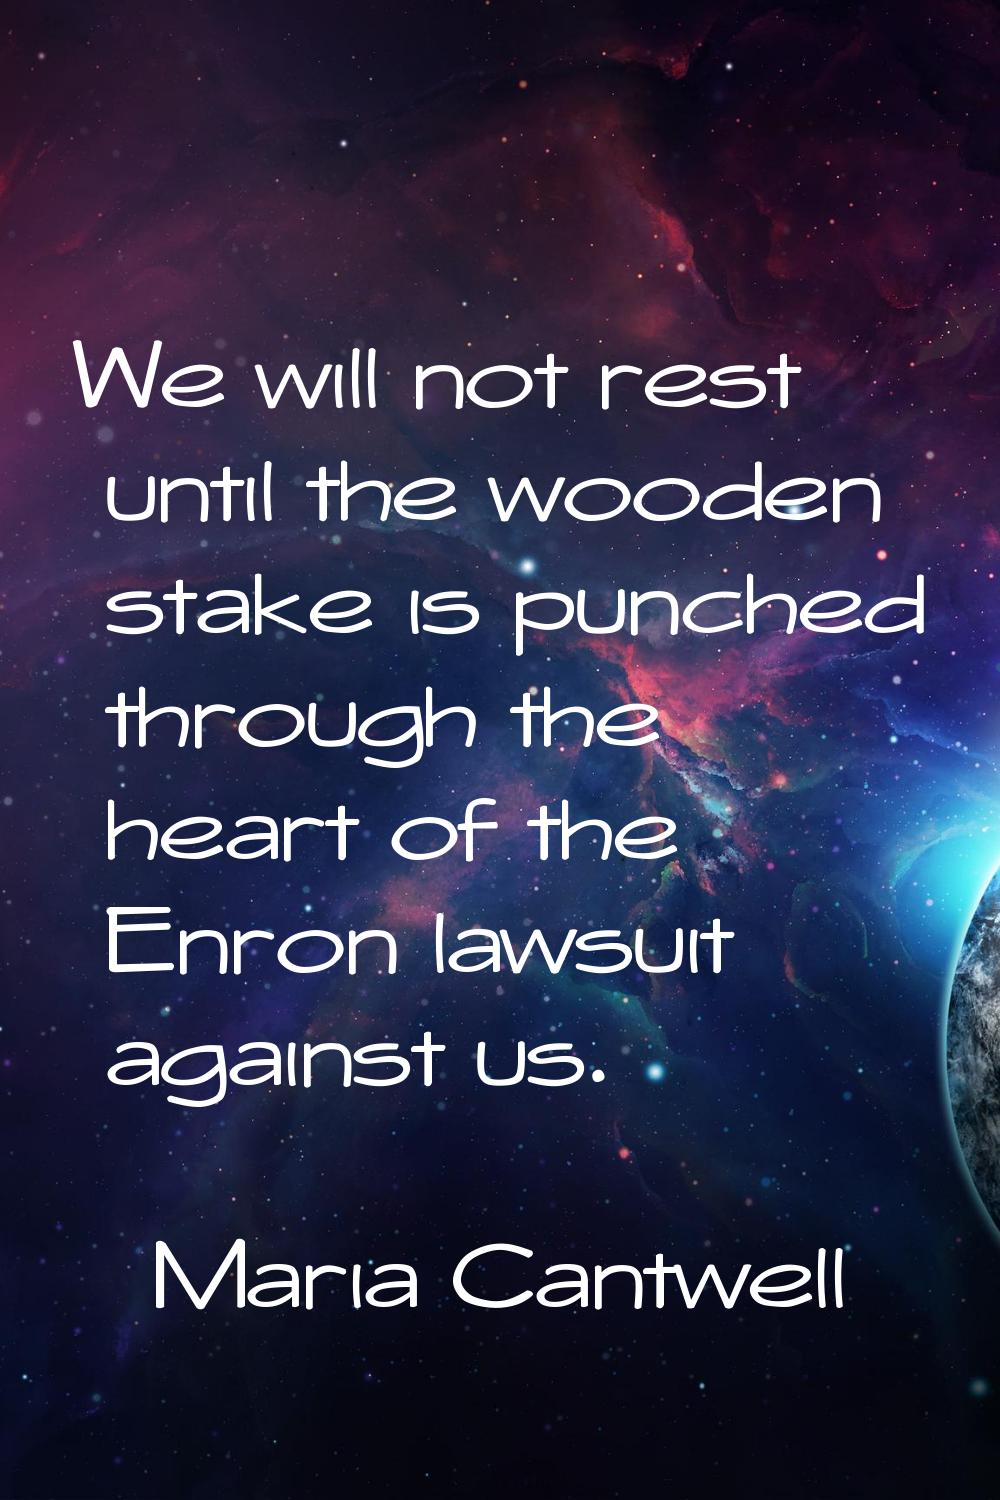 We will not rest until the wooden stake is punched through the heart of the Enron lawsuit against u